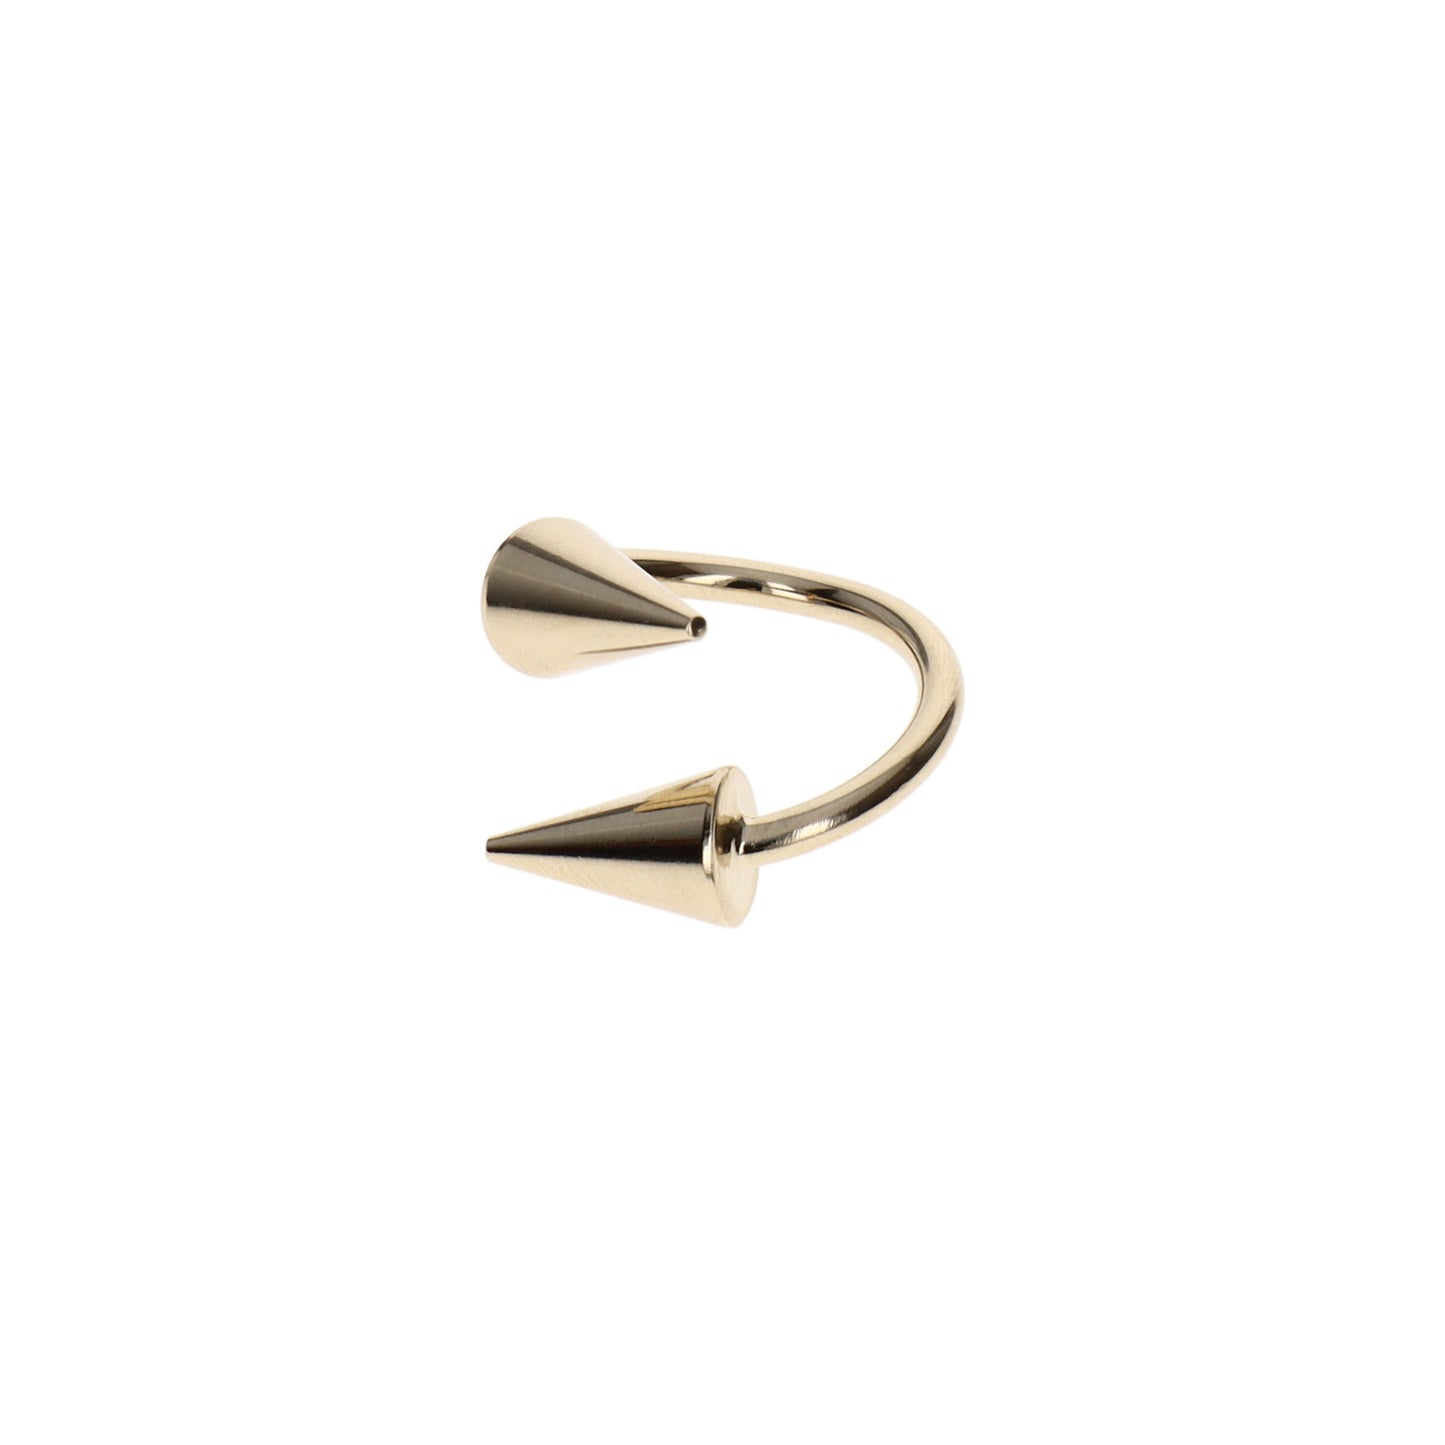 Justine Clenquet Rose Ring, Pale Gold